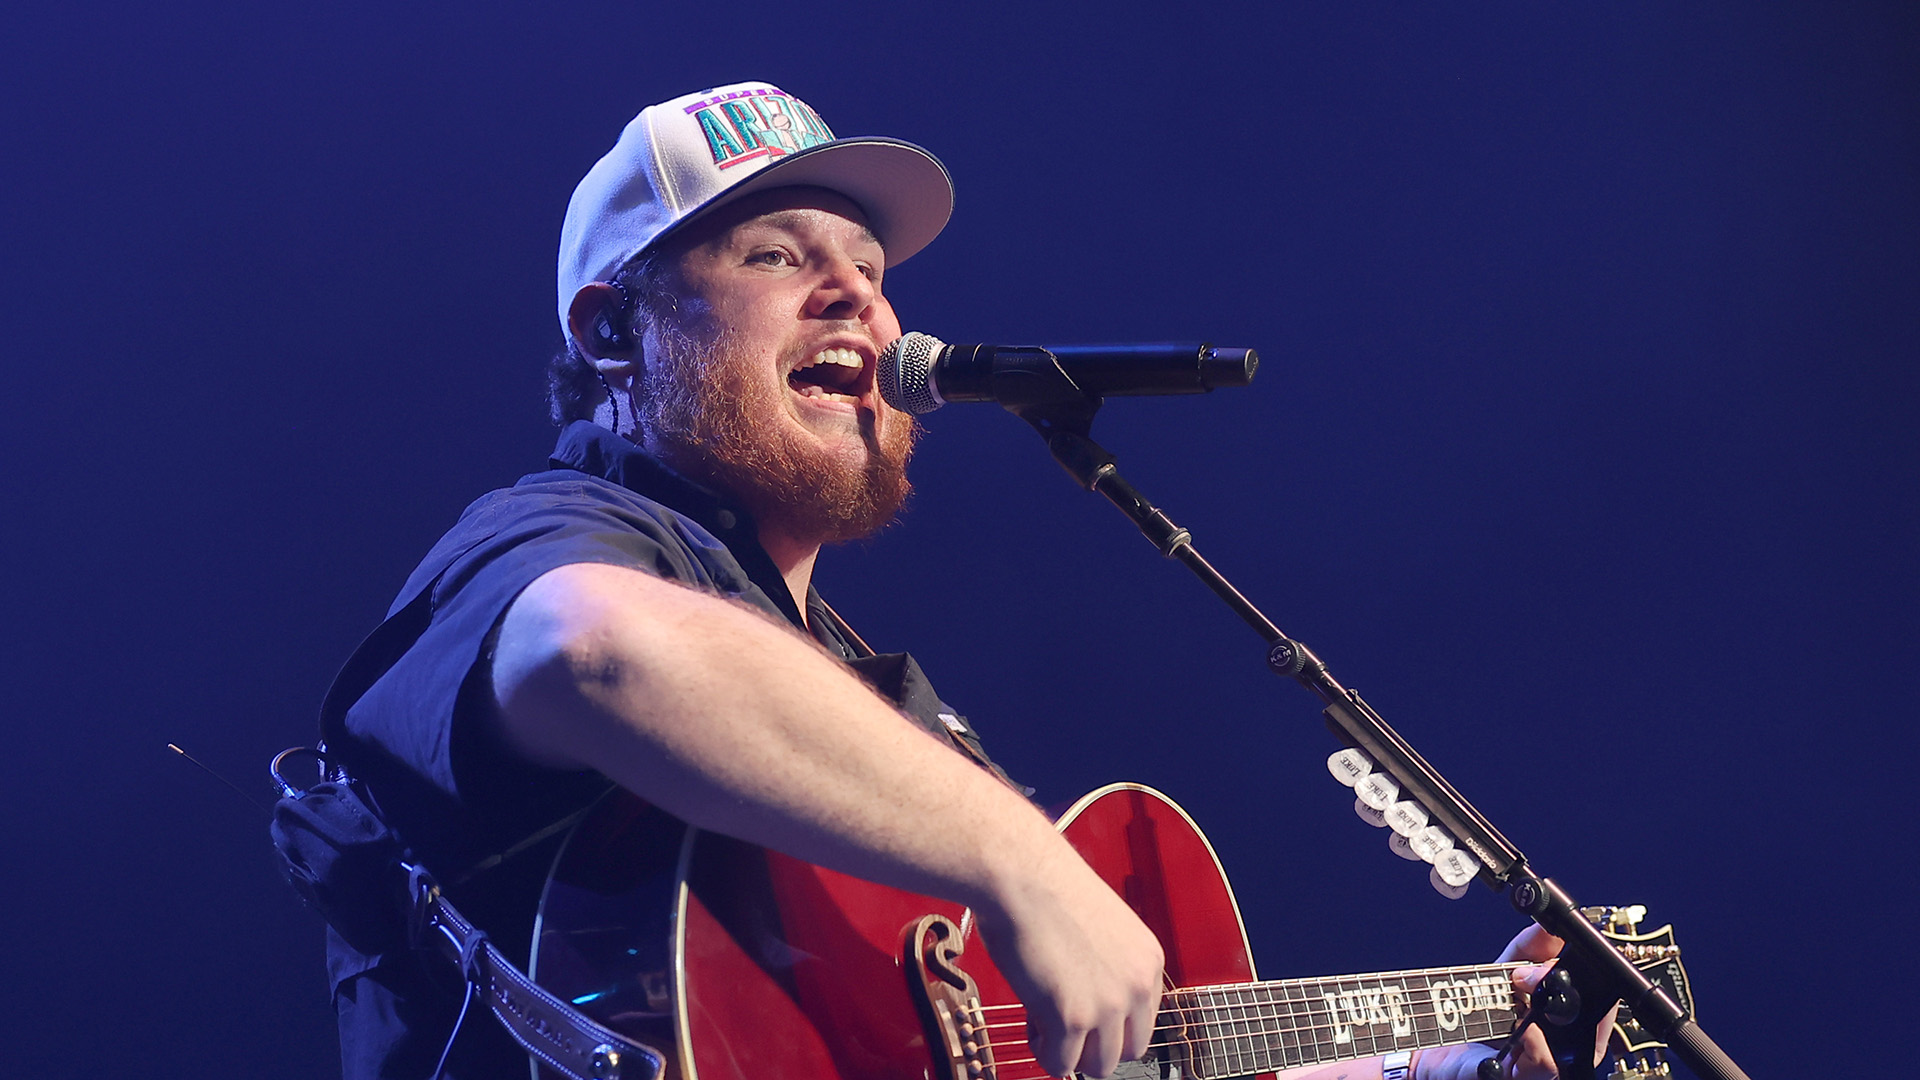 Luke Combs performs ahead of the Super Bowl at the Arizona Financial Theatre in Phoenix for SiriusXM